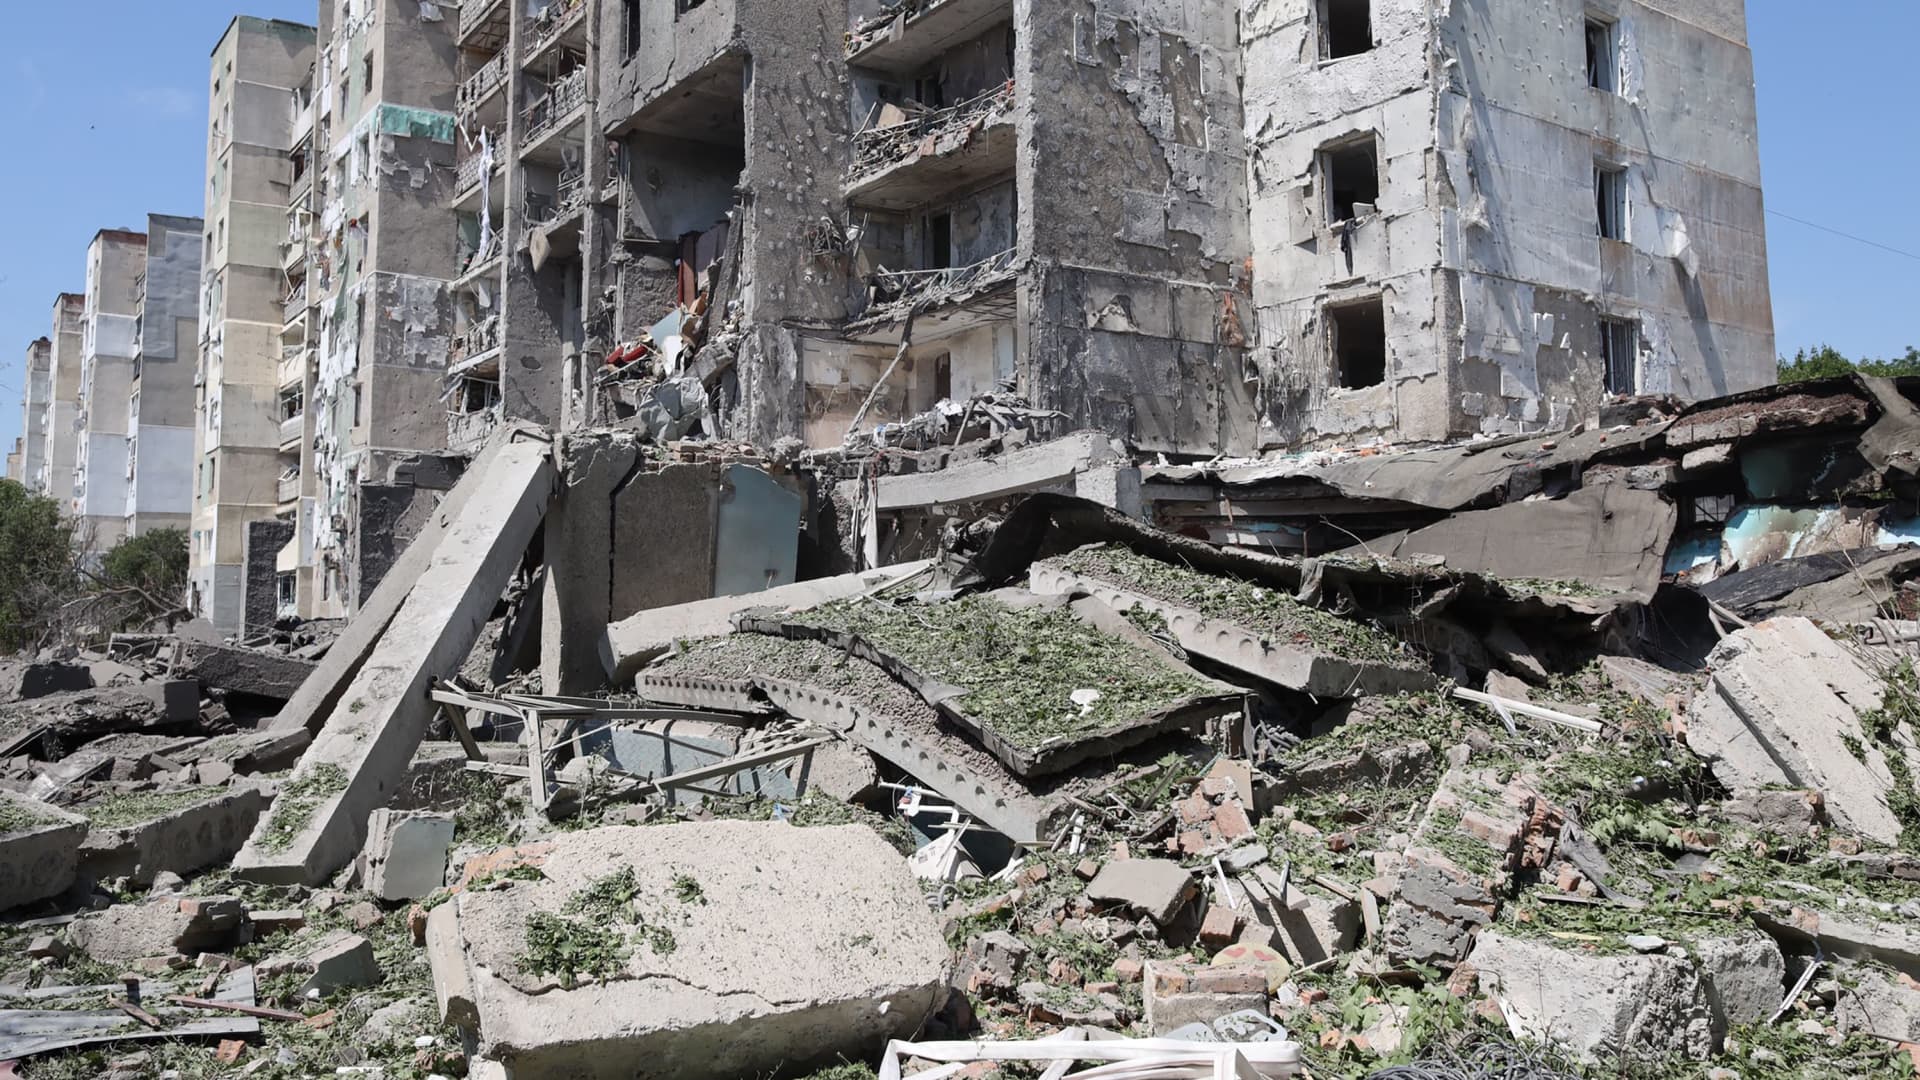 This photograph taken on July 1, 2022, shows a general view of a destroyed building after being hit by a missile strike in the Ukrainian town of Serhiivka, near Odesa, killing at least 20 people and injuring 38.